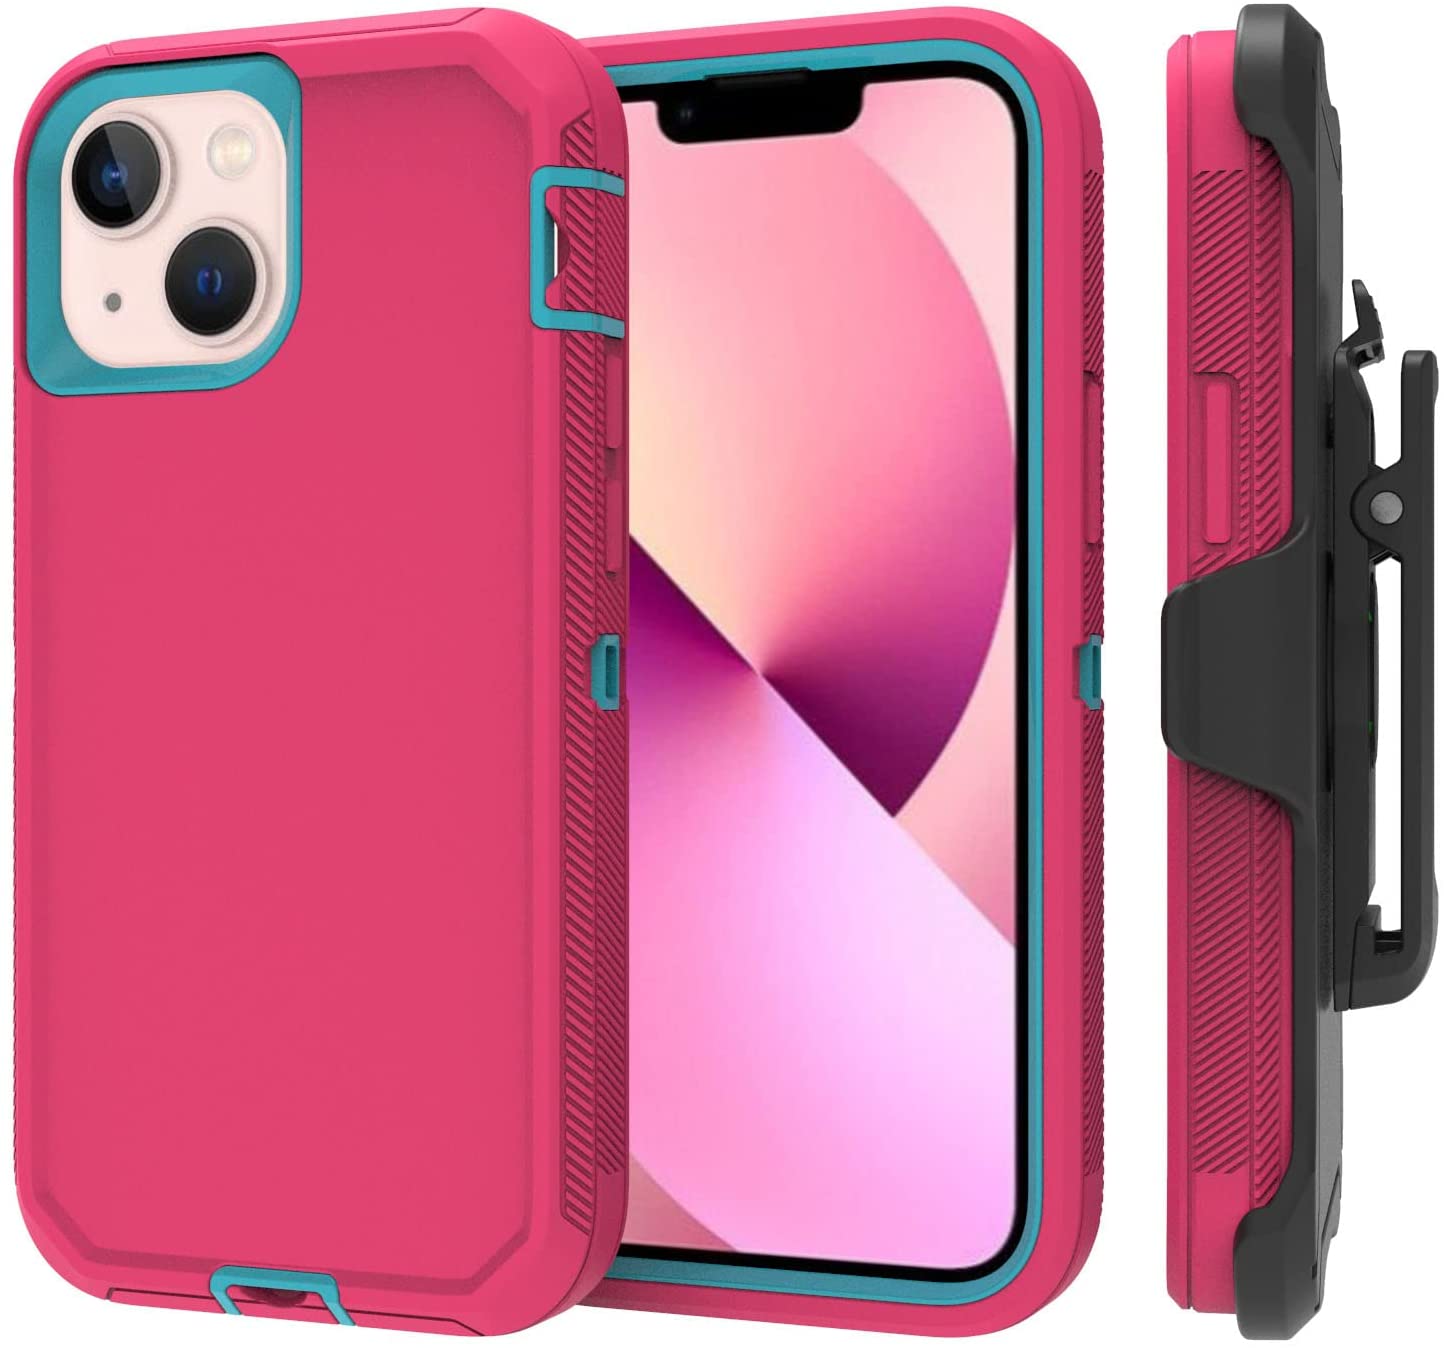 Premium Armor Heavy Duty Case with Clip for iPHONE 12 / 12 Pro 6.1 (Hot Pink Blue)